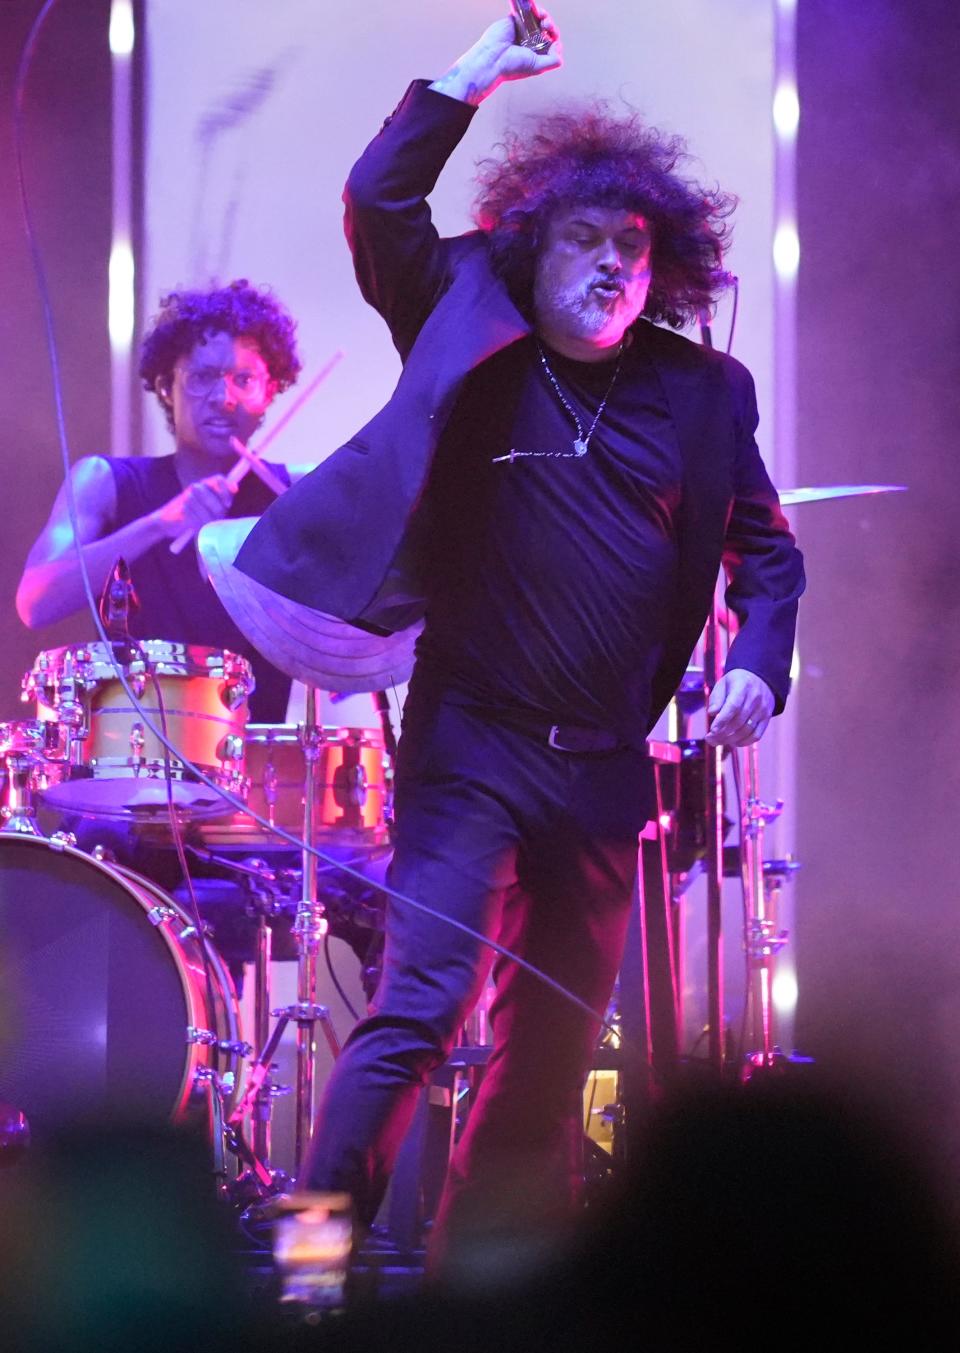 The Mars Volta performs at the Austin City Limits Music Festival in 2023. The new film "Omar and Cedric: If This Ever Gets Weird" looks at the friendship between the band's leaders Omar Rodríguez-López and Cedric Bixler-Zavala.